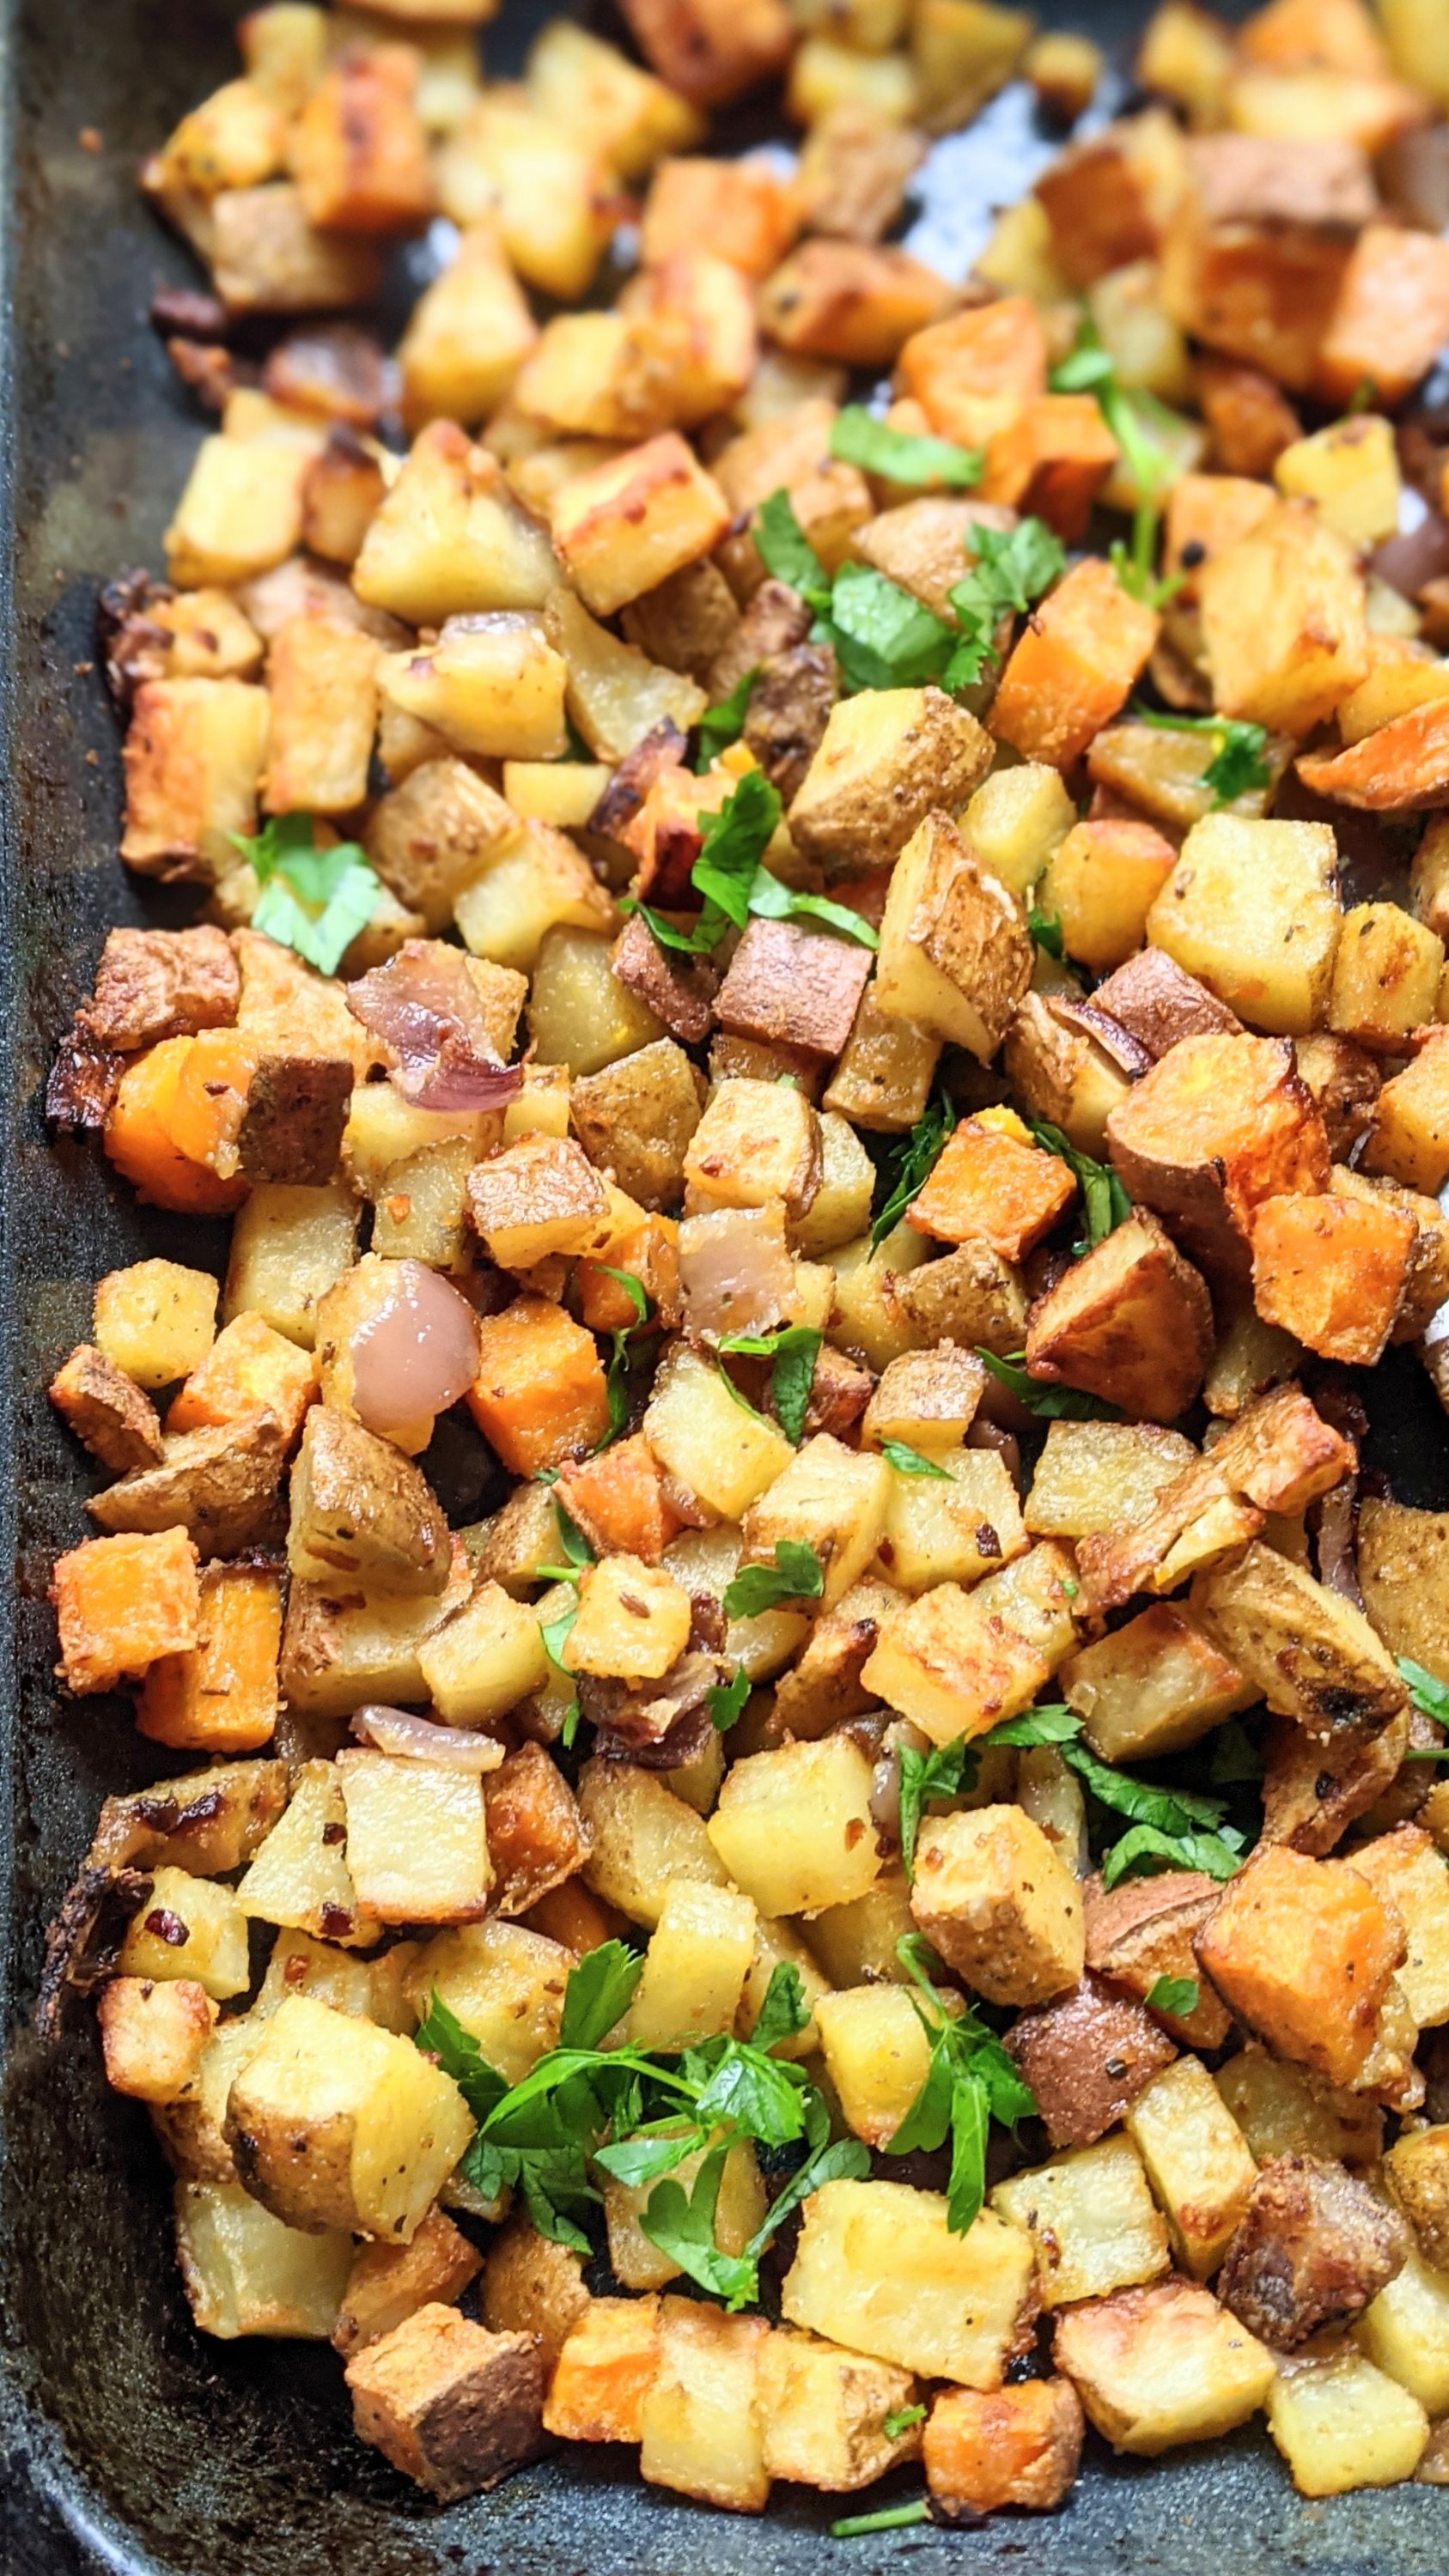 gluten free home fries recipe whole30 plant based breakfast recipes healthy root vegetable home fries simple flavorful brunch ideas paleo